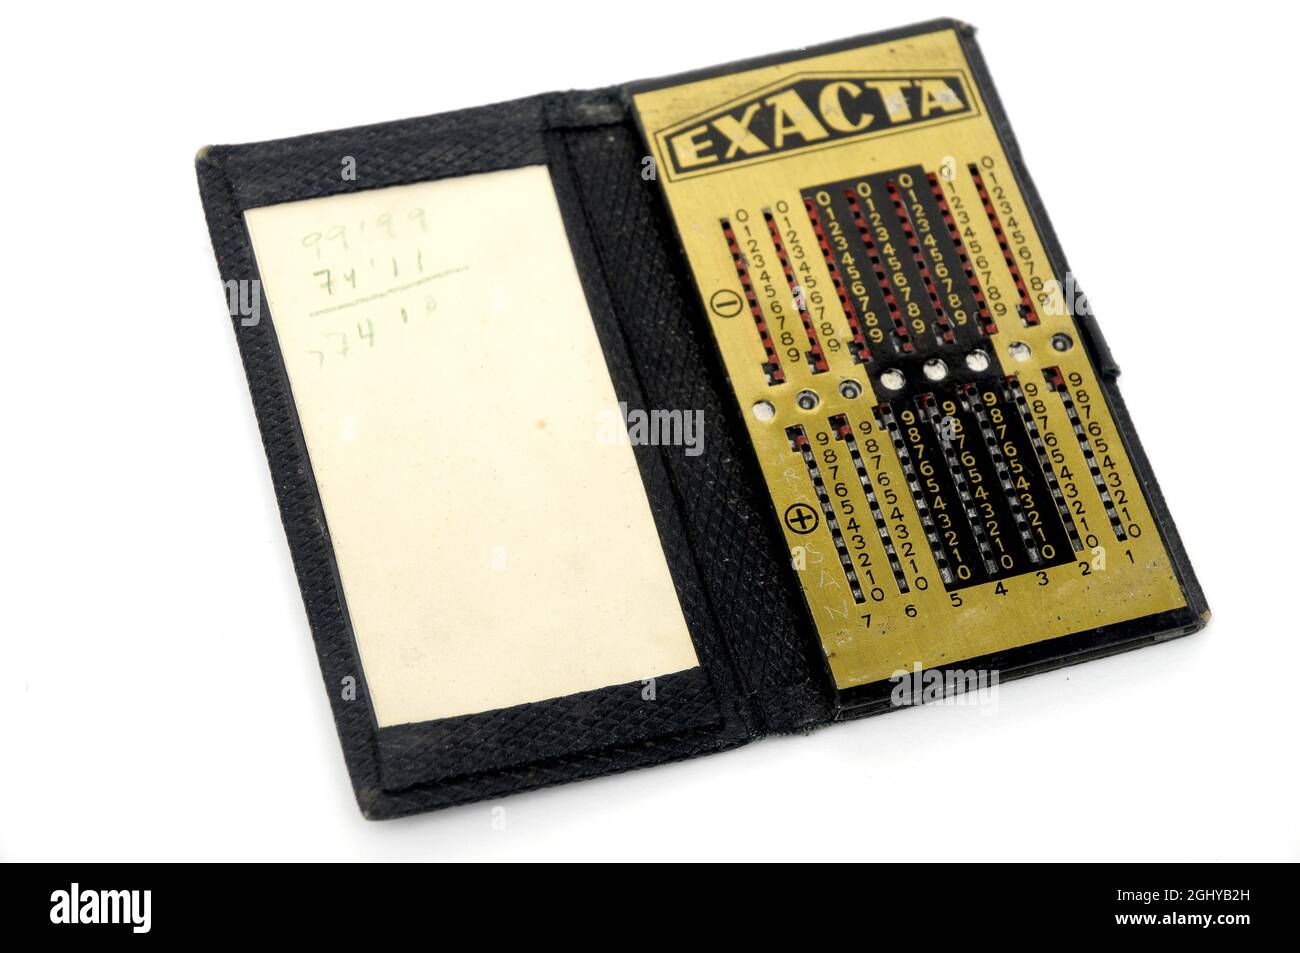 Pocket calculator, calculator, exact,, vintage, second hand, used, vintage  object, 1950s Stock Photo - Alamy